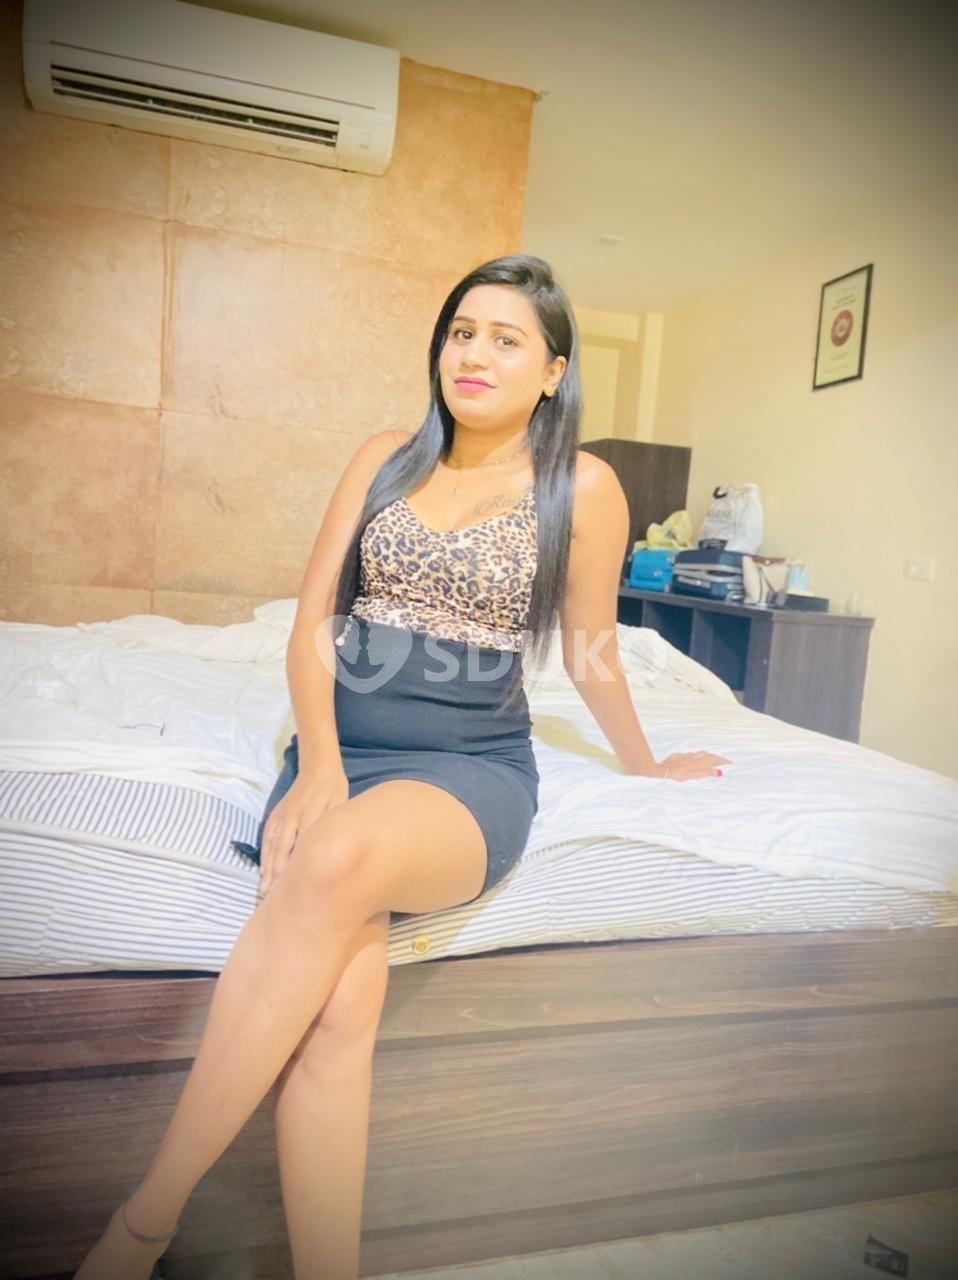 VADAPALANI (CHENNAI)📞BEST HIGH PROFILE CALL GIRL FOR SEX AND SATISFACTION CALL ME NOW 📞